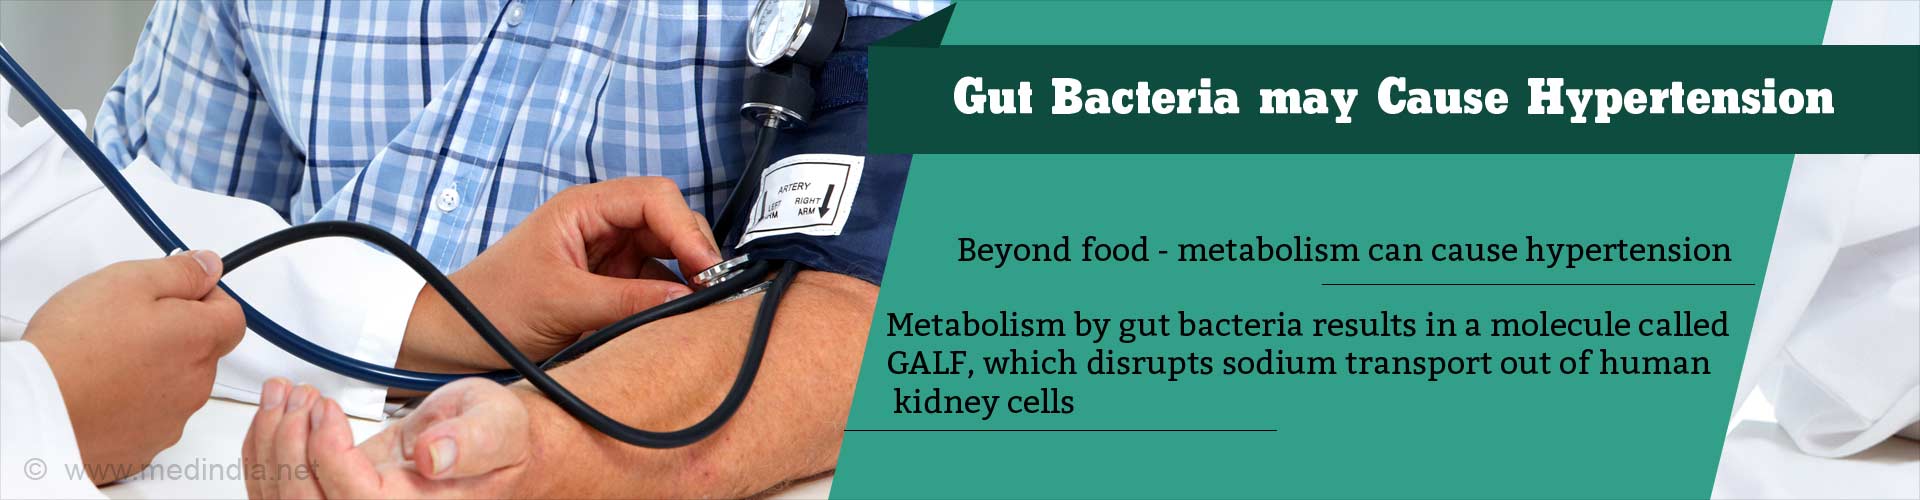 Gut Bacteria may cause Hypertension
- Beyond food - Metabolism can cause hypertension
- Metabolism by gut bacteria results in a molecule calles GALF, which disrupts sodium transport out of human kidney cells